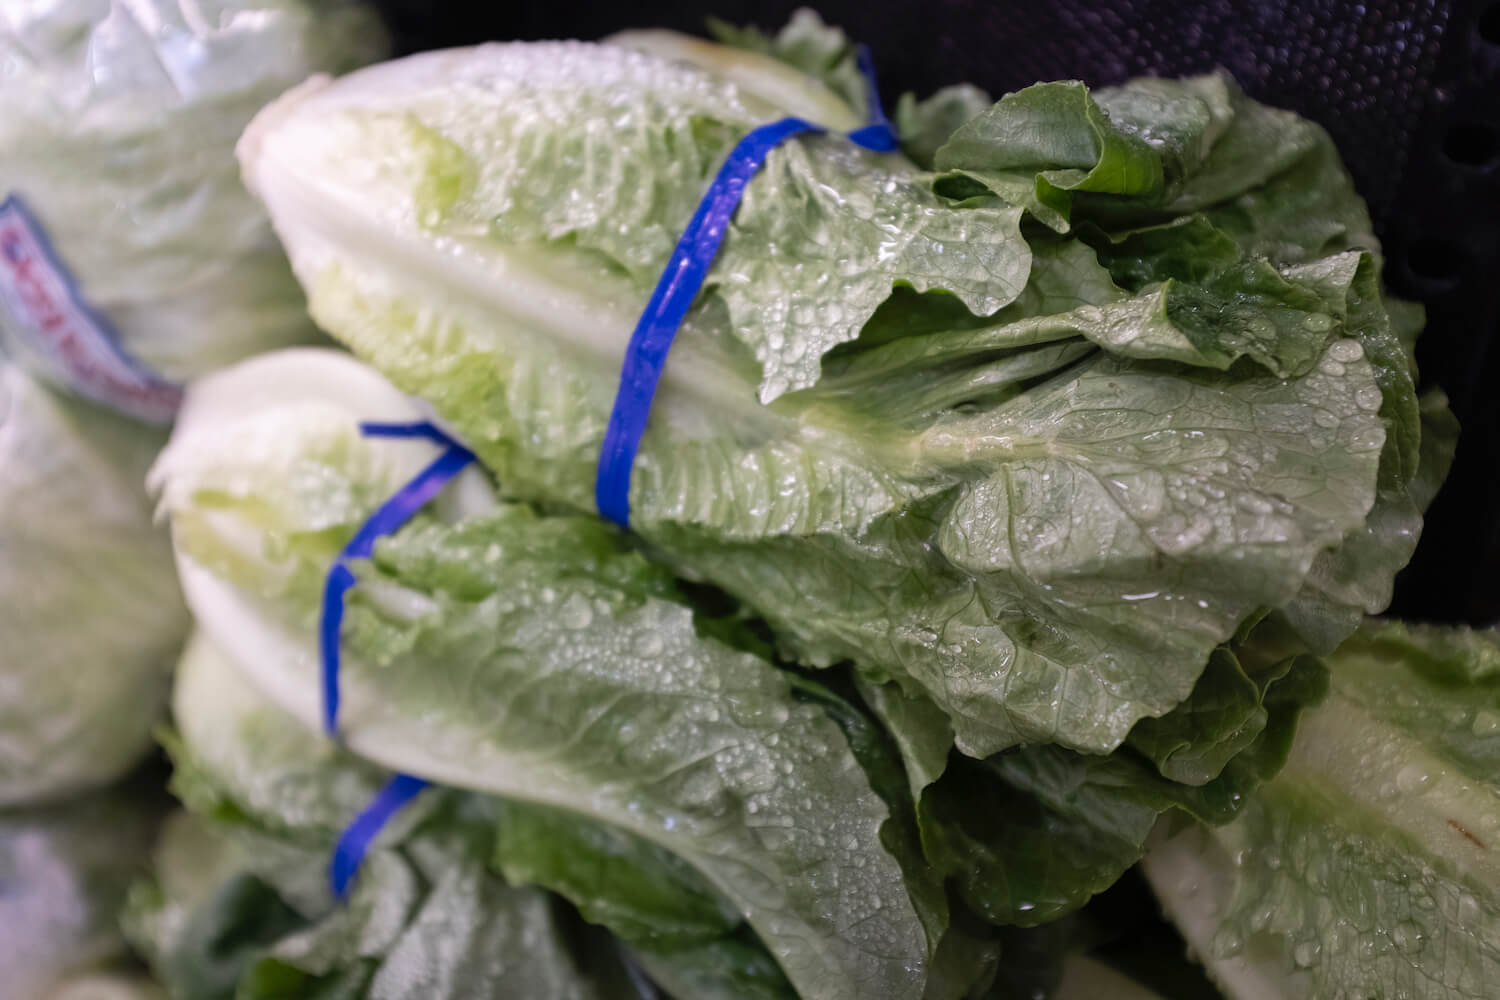 Shot of lettuce // Why climate change will lead to more produce contamination